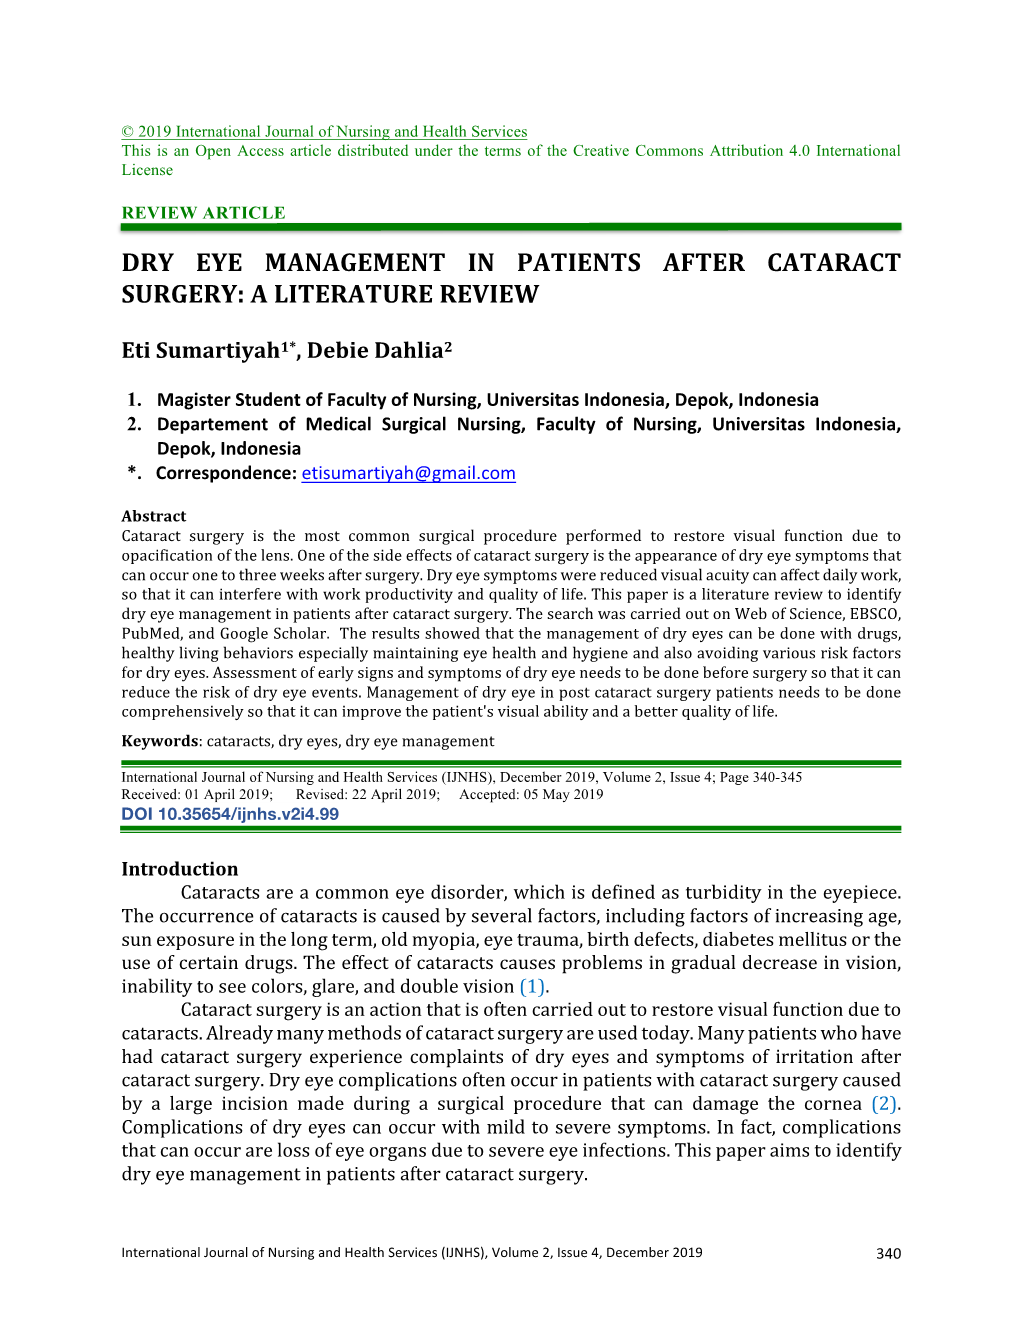 Dry Eye Management in Patients After Cataract Surgery: a Literature Review